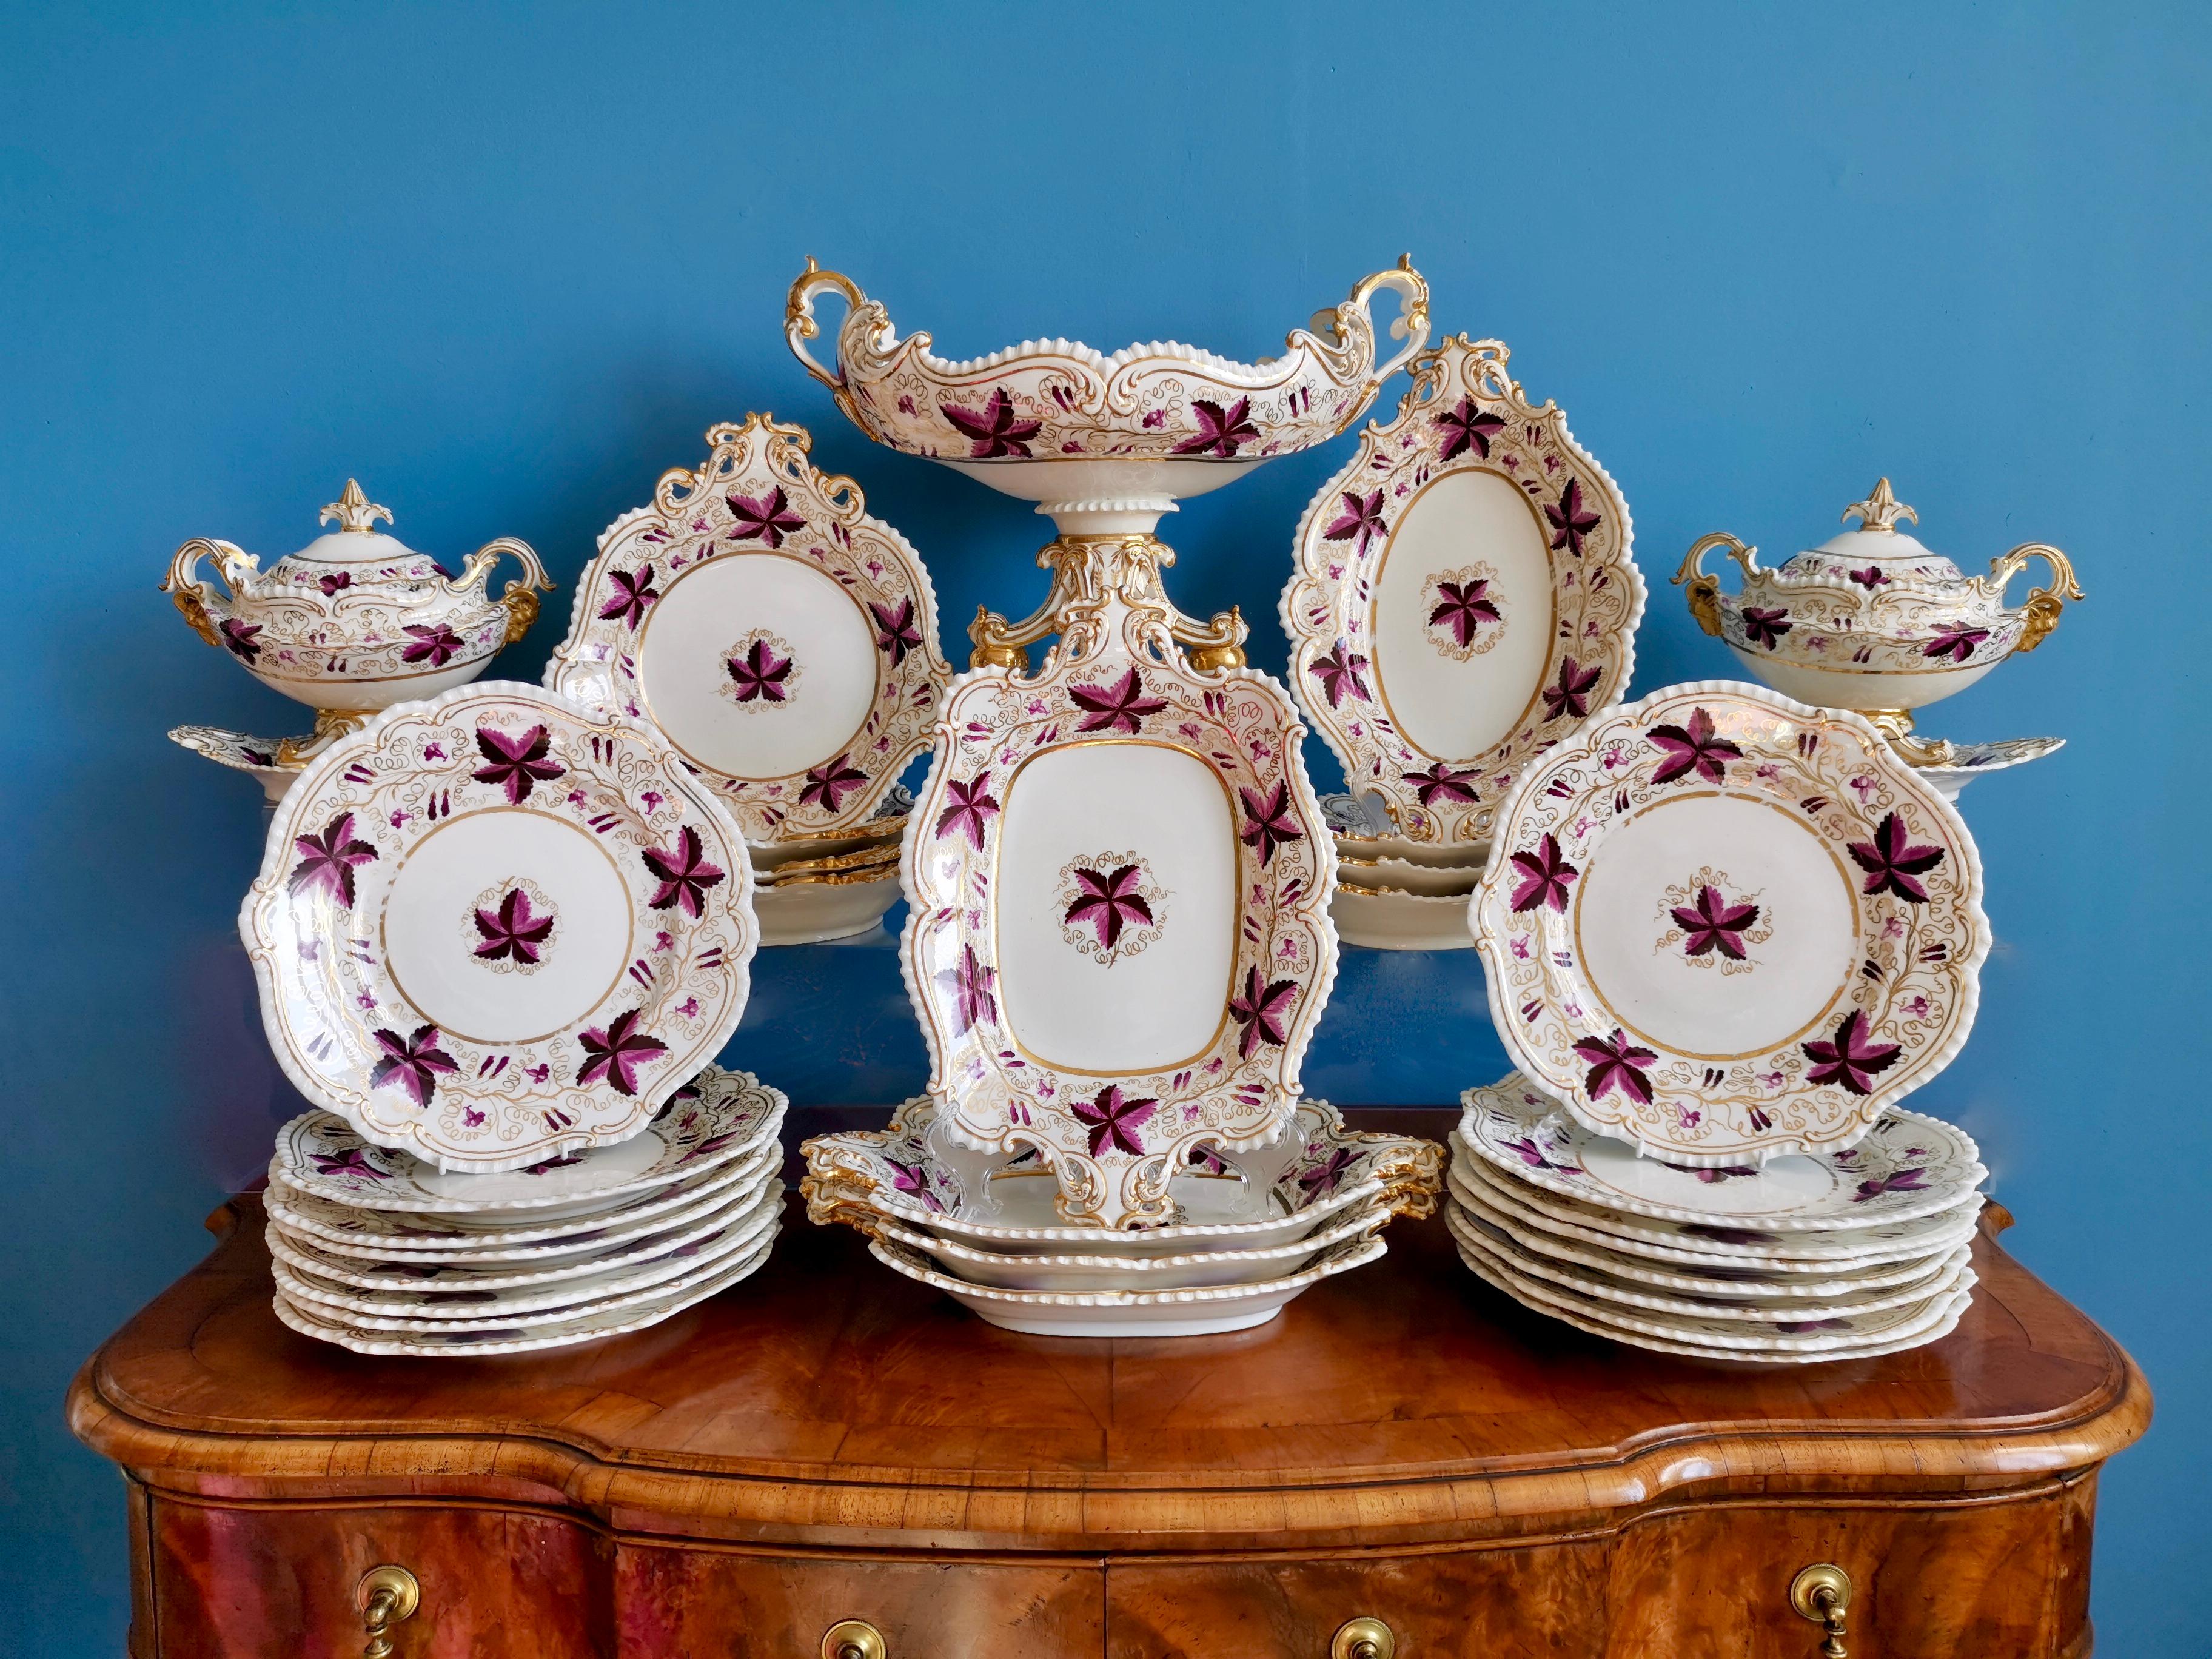 This is a rare and spectacular full dessert service made by Coalport around the year 1820. The service consists of a large footed comport or centre piece, two lidded sauce tureens on stands, four rectangular dishes, four oval dishes, four shell